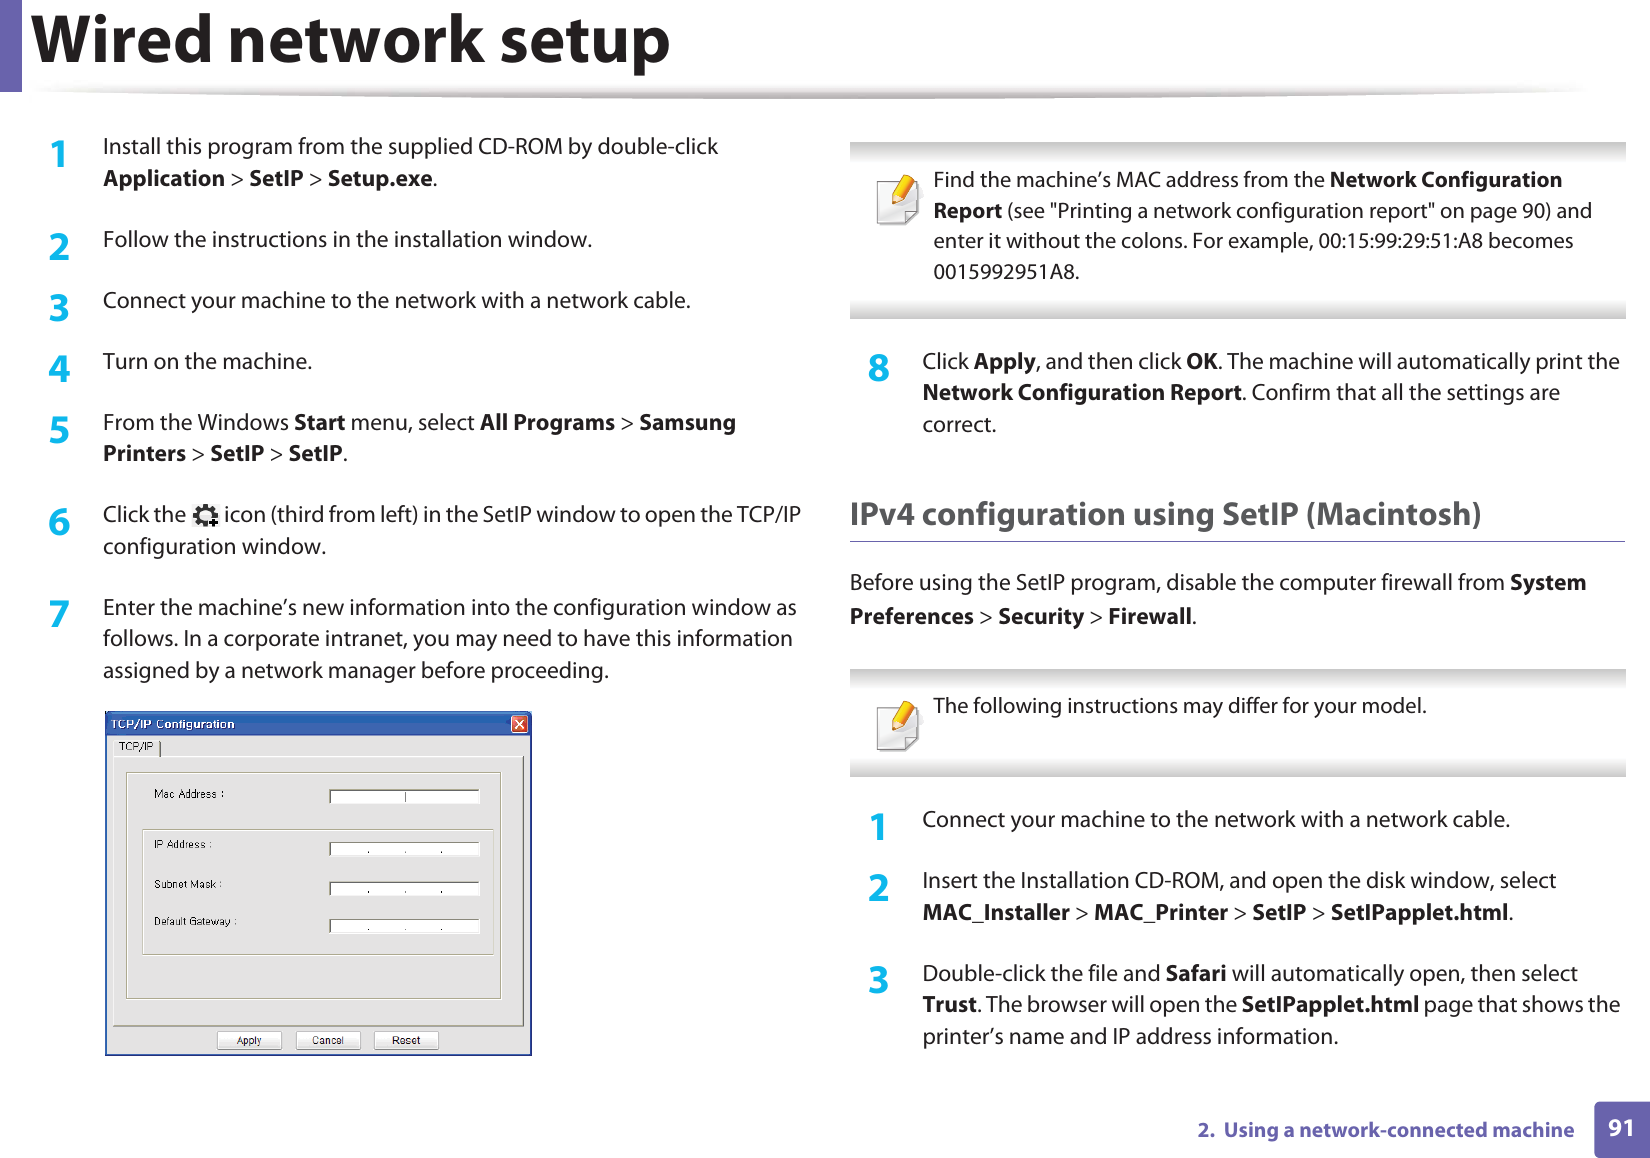 Wired network setup912.  Using a network-connected machine1Install this program from the supplied CD-ROM by double-click Application &gt; SetIP &gt; Setup.exe.2  Follow the instructions in the installation window.3  Connect your machine to the network with a network cable.4  Turn on the machine.5  From the Windows Start menu, select All Programs &gt; Samsung Printers &gt; SetIP &gt; SetIP.6  Click the   icon (third from left) in the SetIP window to open the TCP/IP configuration window.7  Enter the machine’s new information into the configuration window as follows. In a corporate intranet, you may need to have this information assigned by a network manager before proceeding. Find the machine’s MAC address from the Network Configuration Report (see &quot;Printing a network configuration report&quot; on page 90) and enter it without the colons. For example, 00:15:99:29:51:A8 becomes 0015992951A8. 8  Click Apply, and then click OK. The machine will automatically print the Network Configuration Report. Confirm that all the settings are correct.IPv4 configuration using SetIP (Macintosh)Before using the SetIP program, disable the computer firewall from System Preferences &gt; Security &gt; Firewall. The following instructions may differ for your model. 1Connect your machine to the network with a network cable.2  Insert the Installation CD-ROM, and open the disk window, select MAC_Installer &gt; MAC_Printer &gt; SetIP &gt; SetIPapplet.html.3  Double-click the file and Safari will automatically open, then select Trust. The browser will open the SetIPapplet.html page that shows the printer’s name and IP address information. 